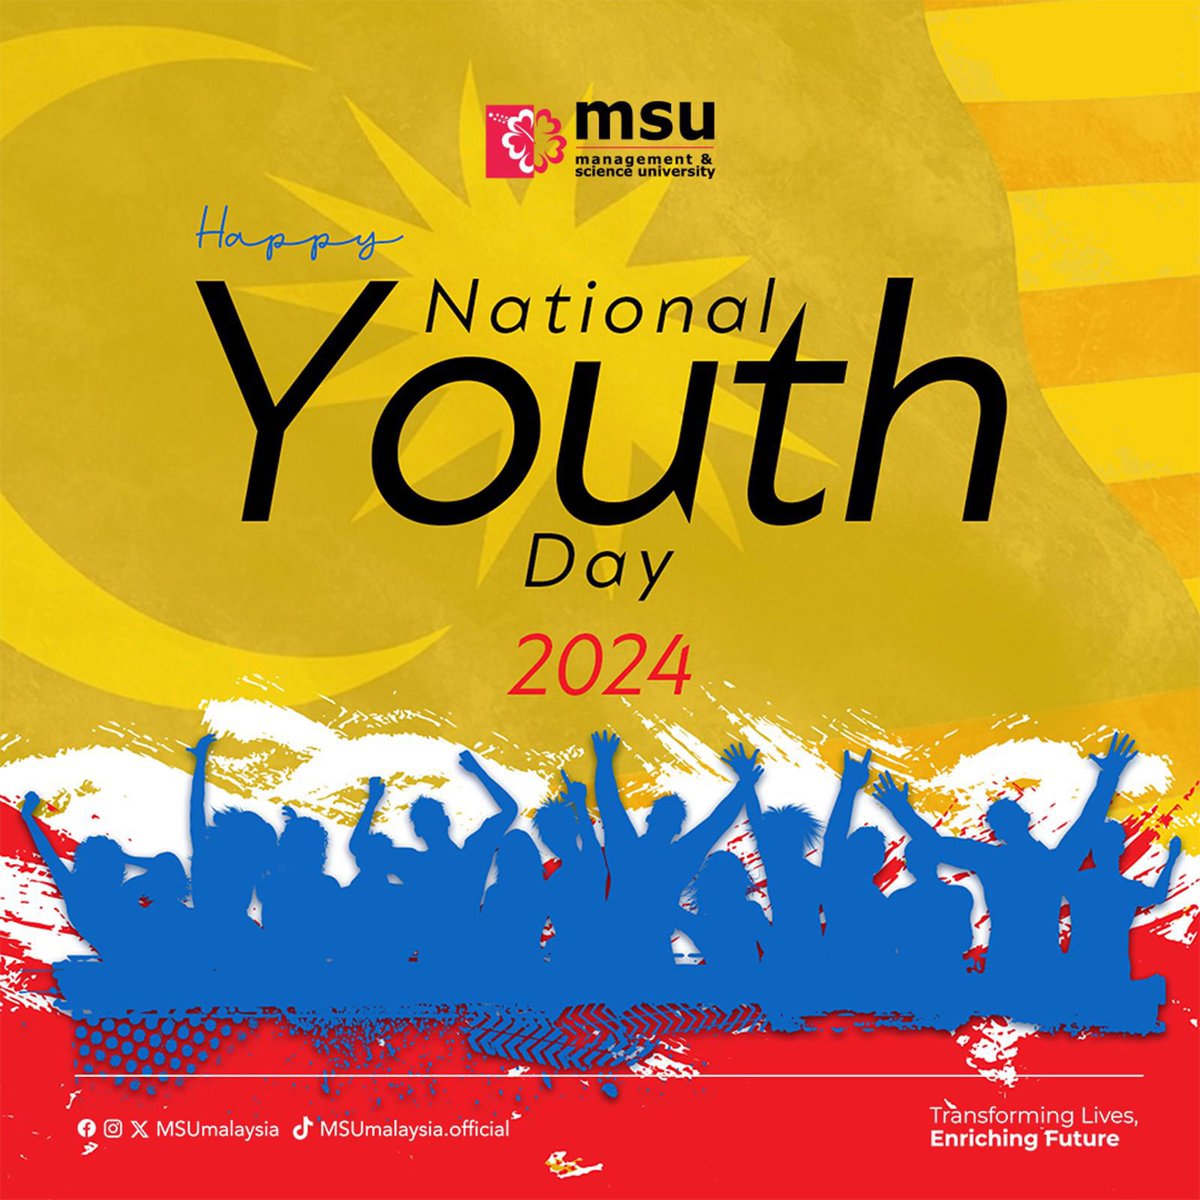 Fostering the youths' potential is the commitment of #MSUmalaysia in our efforts to produce competitive future graduands. Happy National Youth Day 2024, #MSUrians! Believe in your worth!

#YakinBoleh